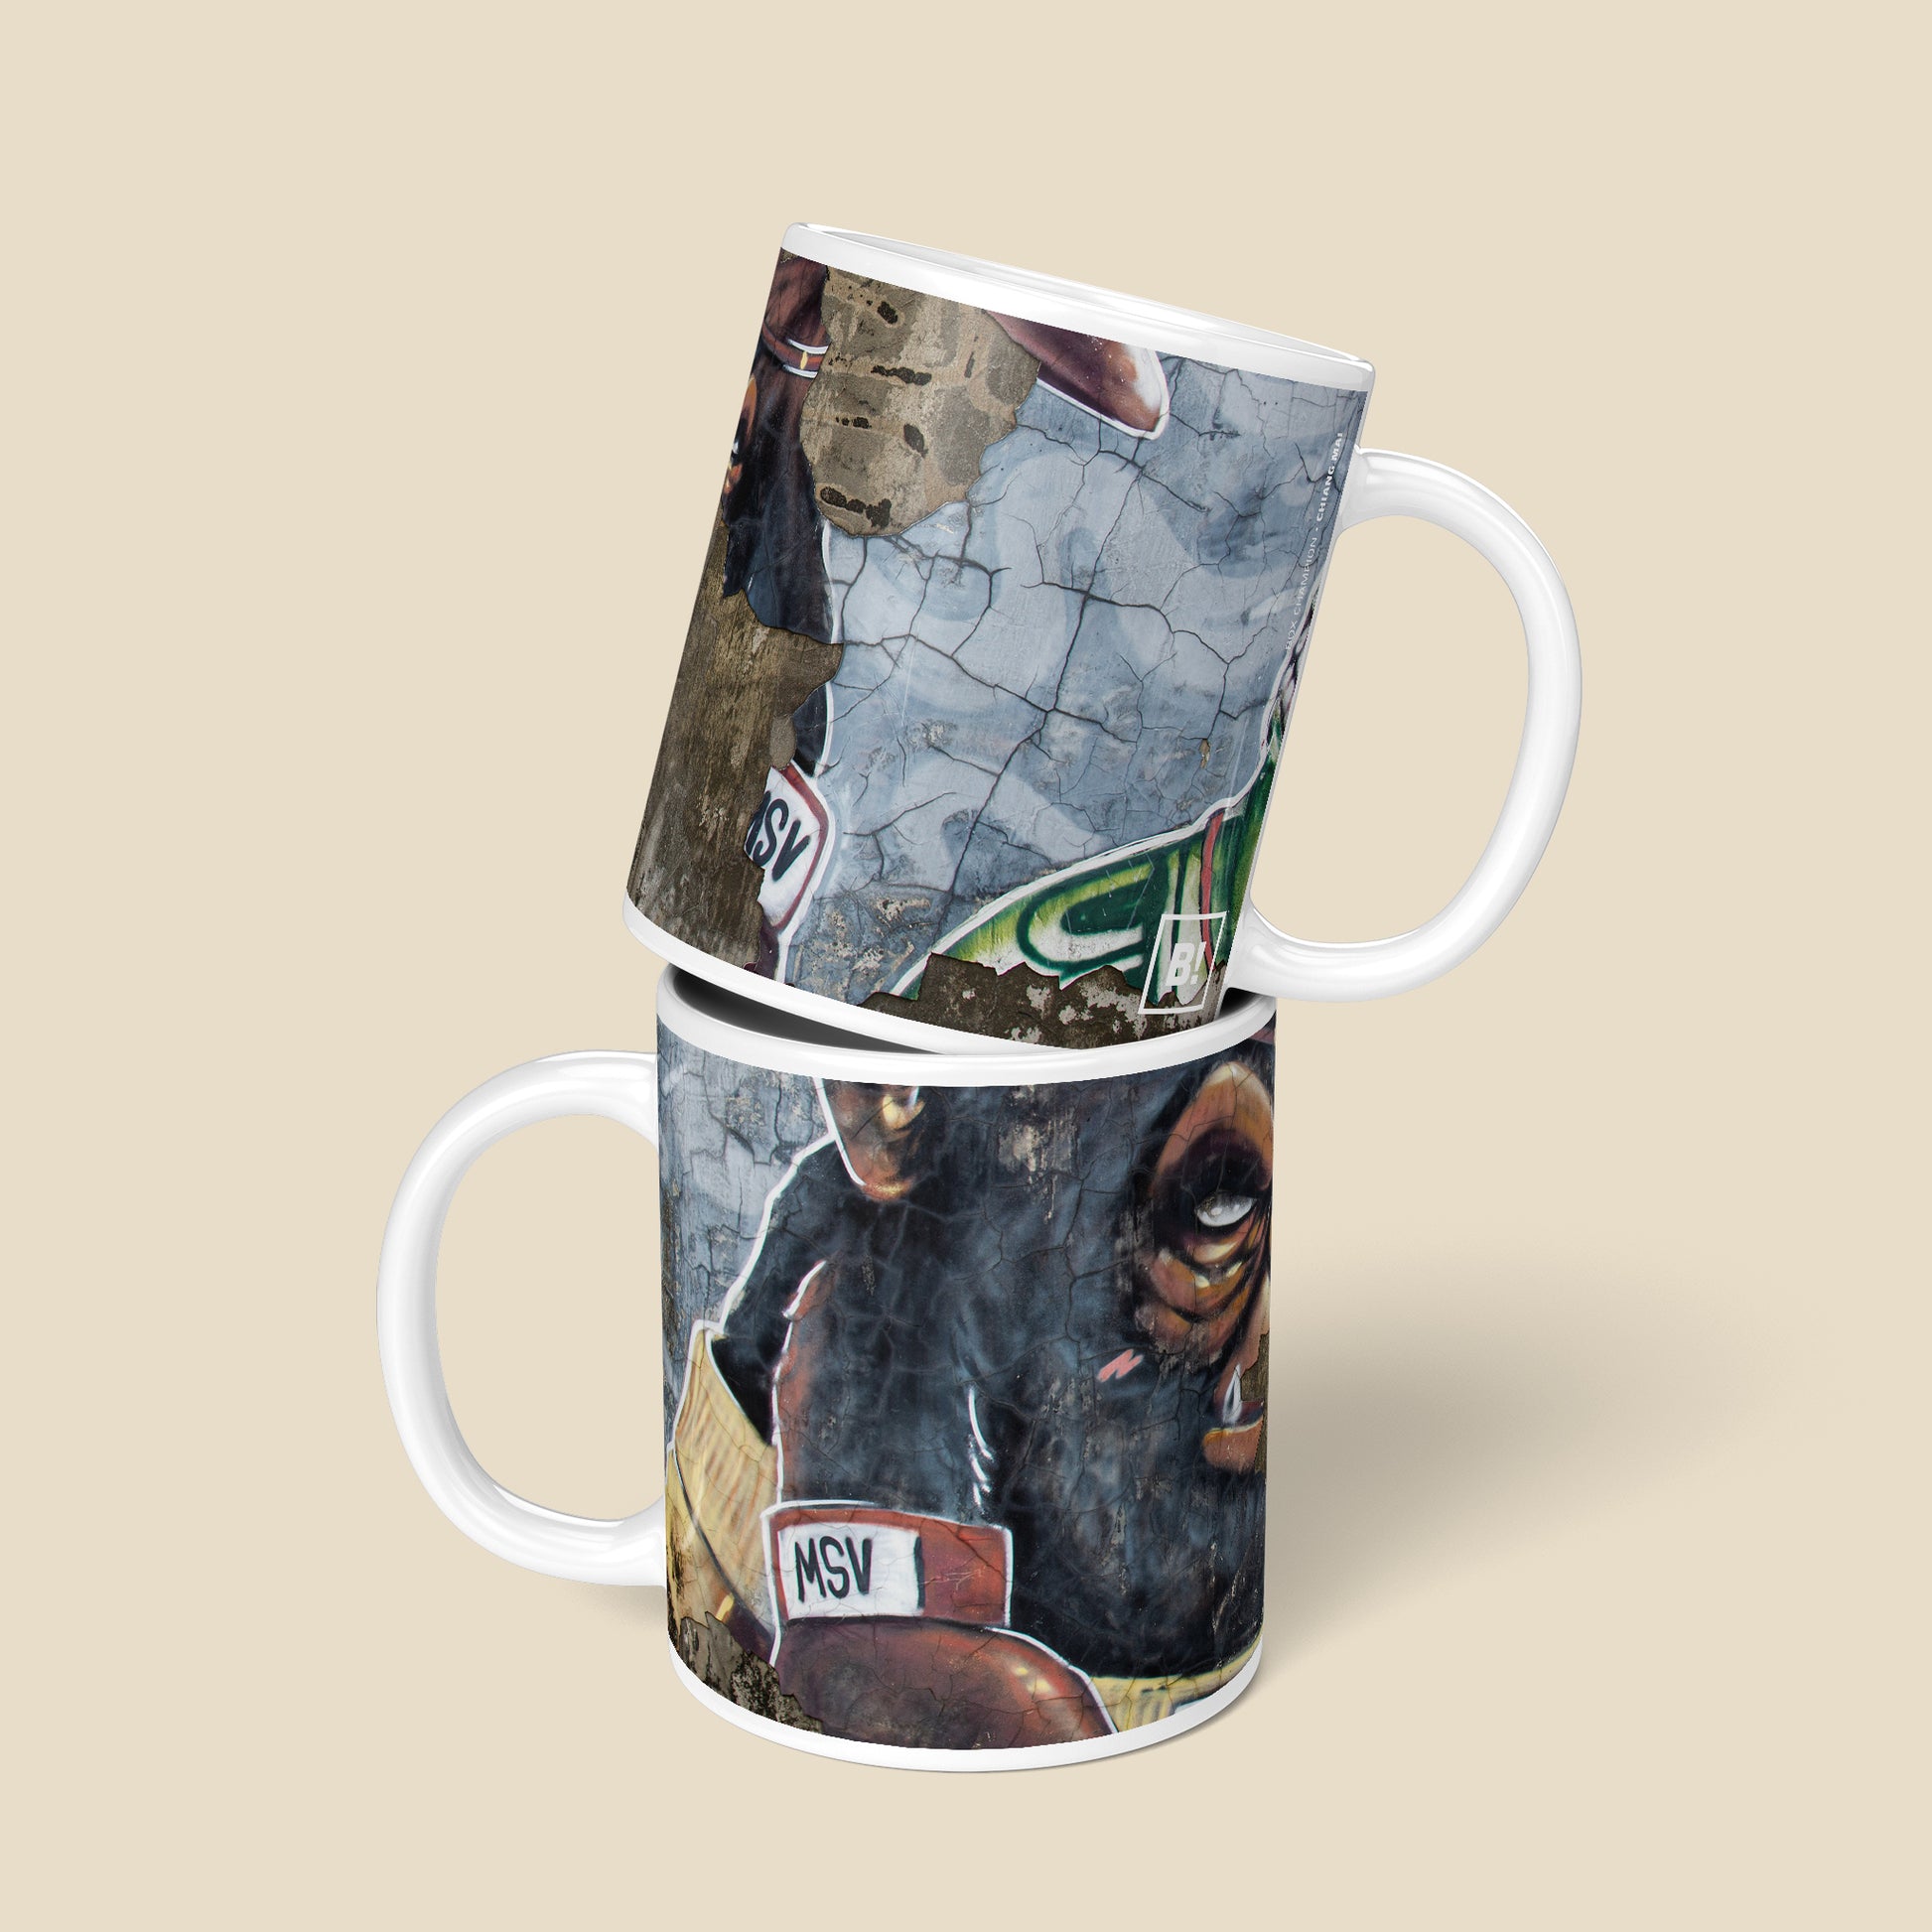 Be inspired by our Urban Art Coffee Mug "Box Champion" from Chiang Mai. This mug features an 11oz size with a front and back view.